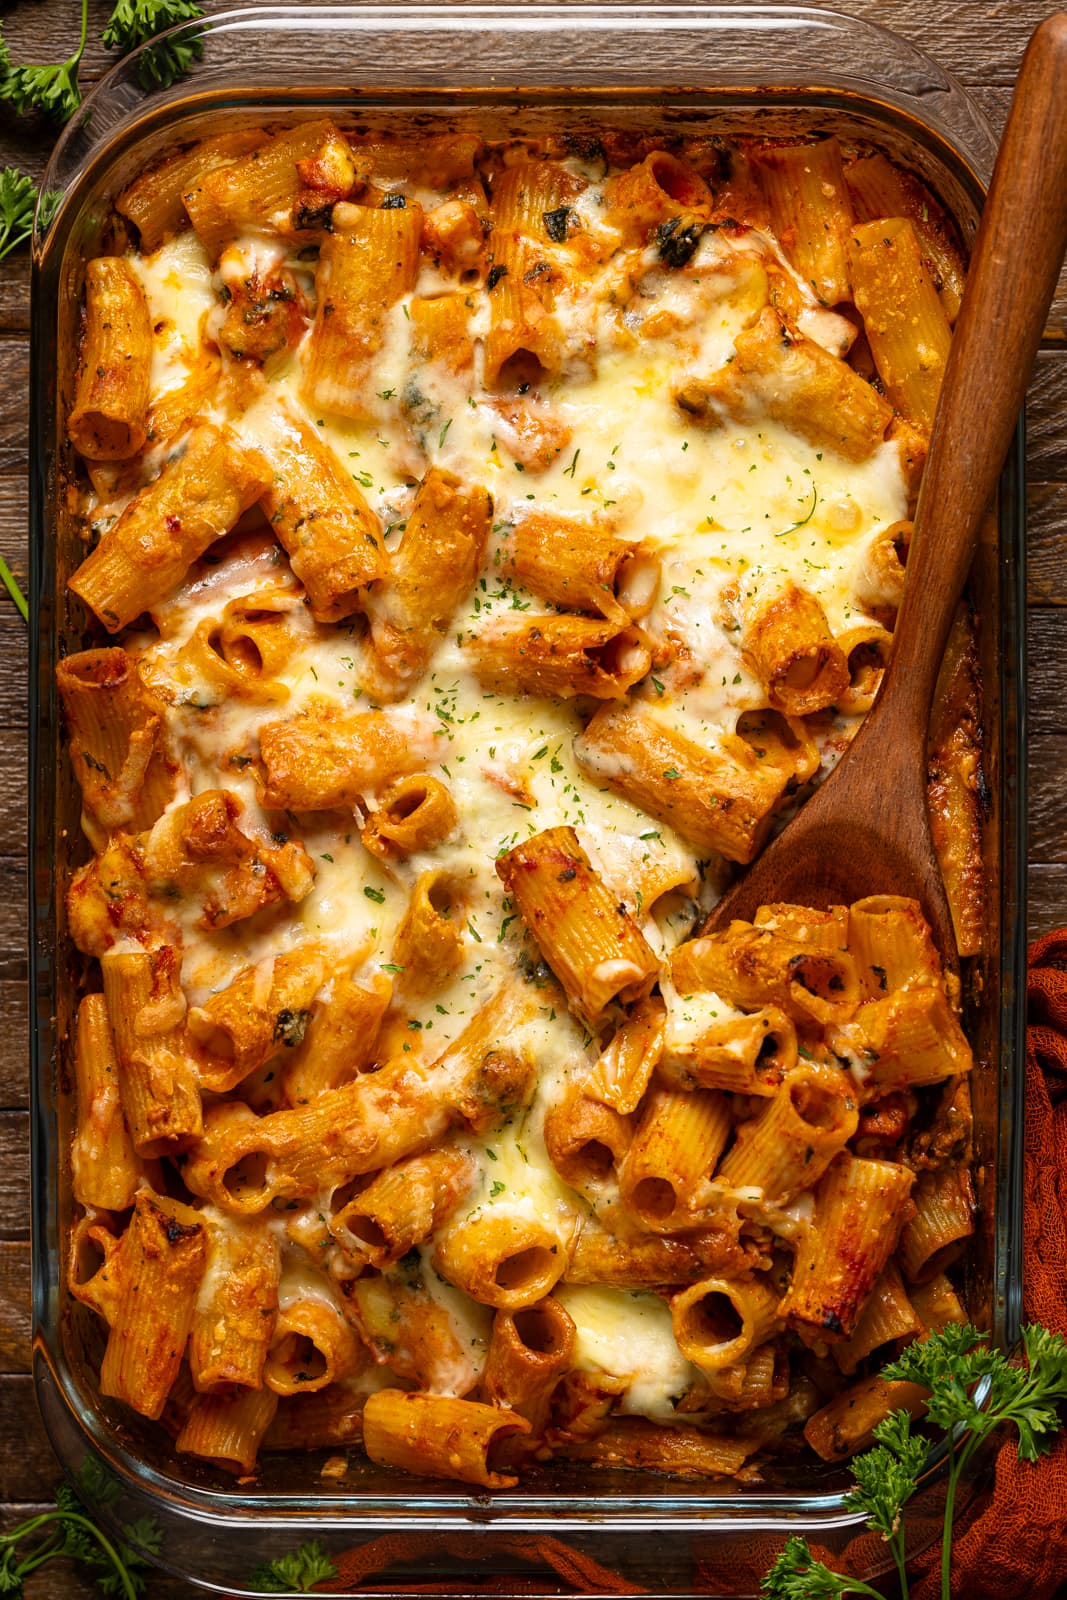 Baked pasta with a wooden spoon.